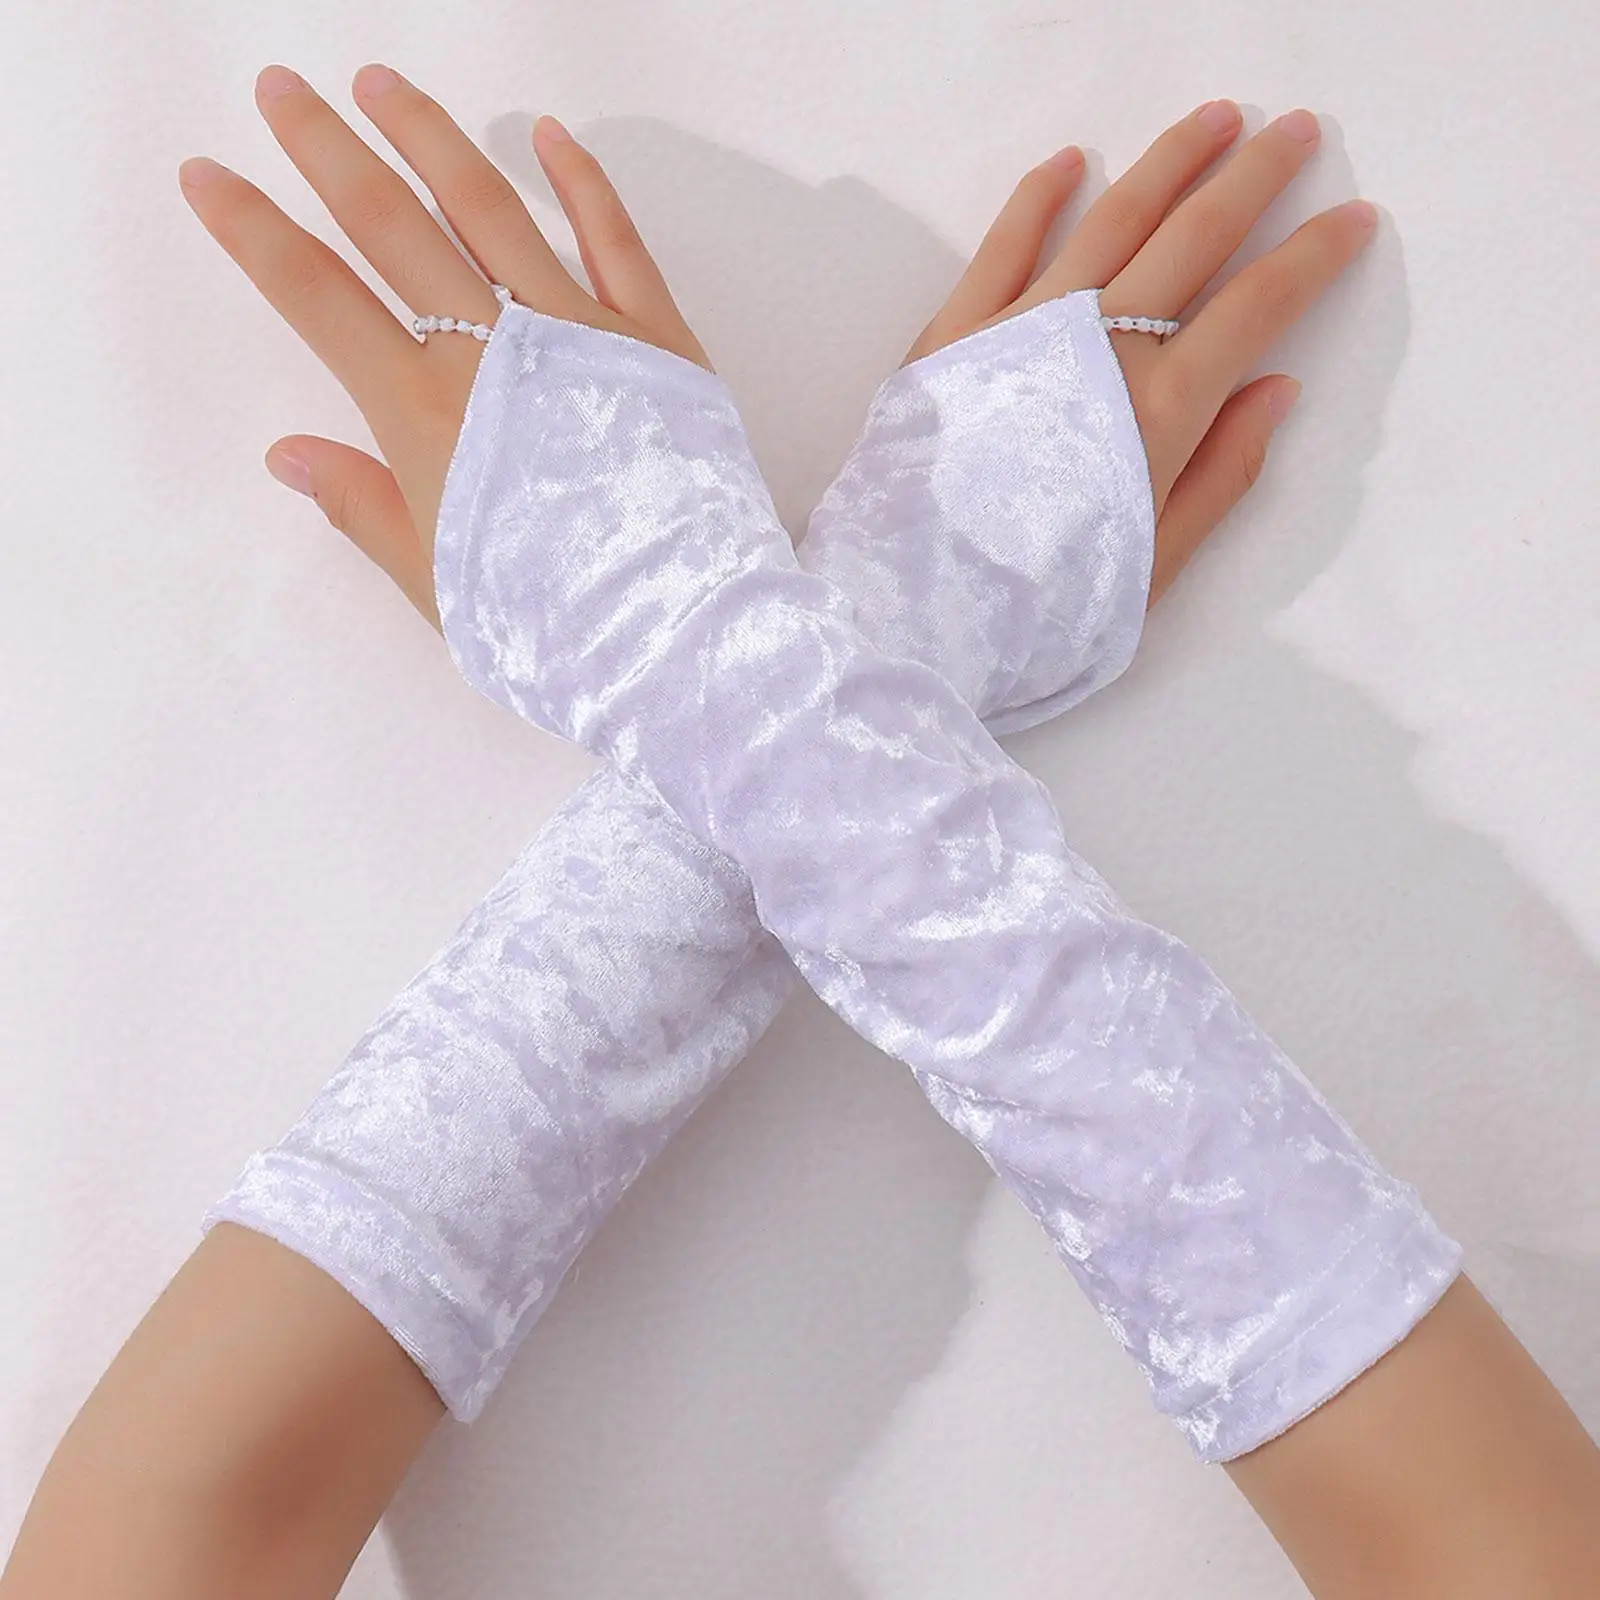 Fashion Fingerless Gloves Arm Warmers Driving Gloves Casual Mittens Ladies Cosplay Soft Women`s Arm Sleeve Warm Gloves for Party